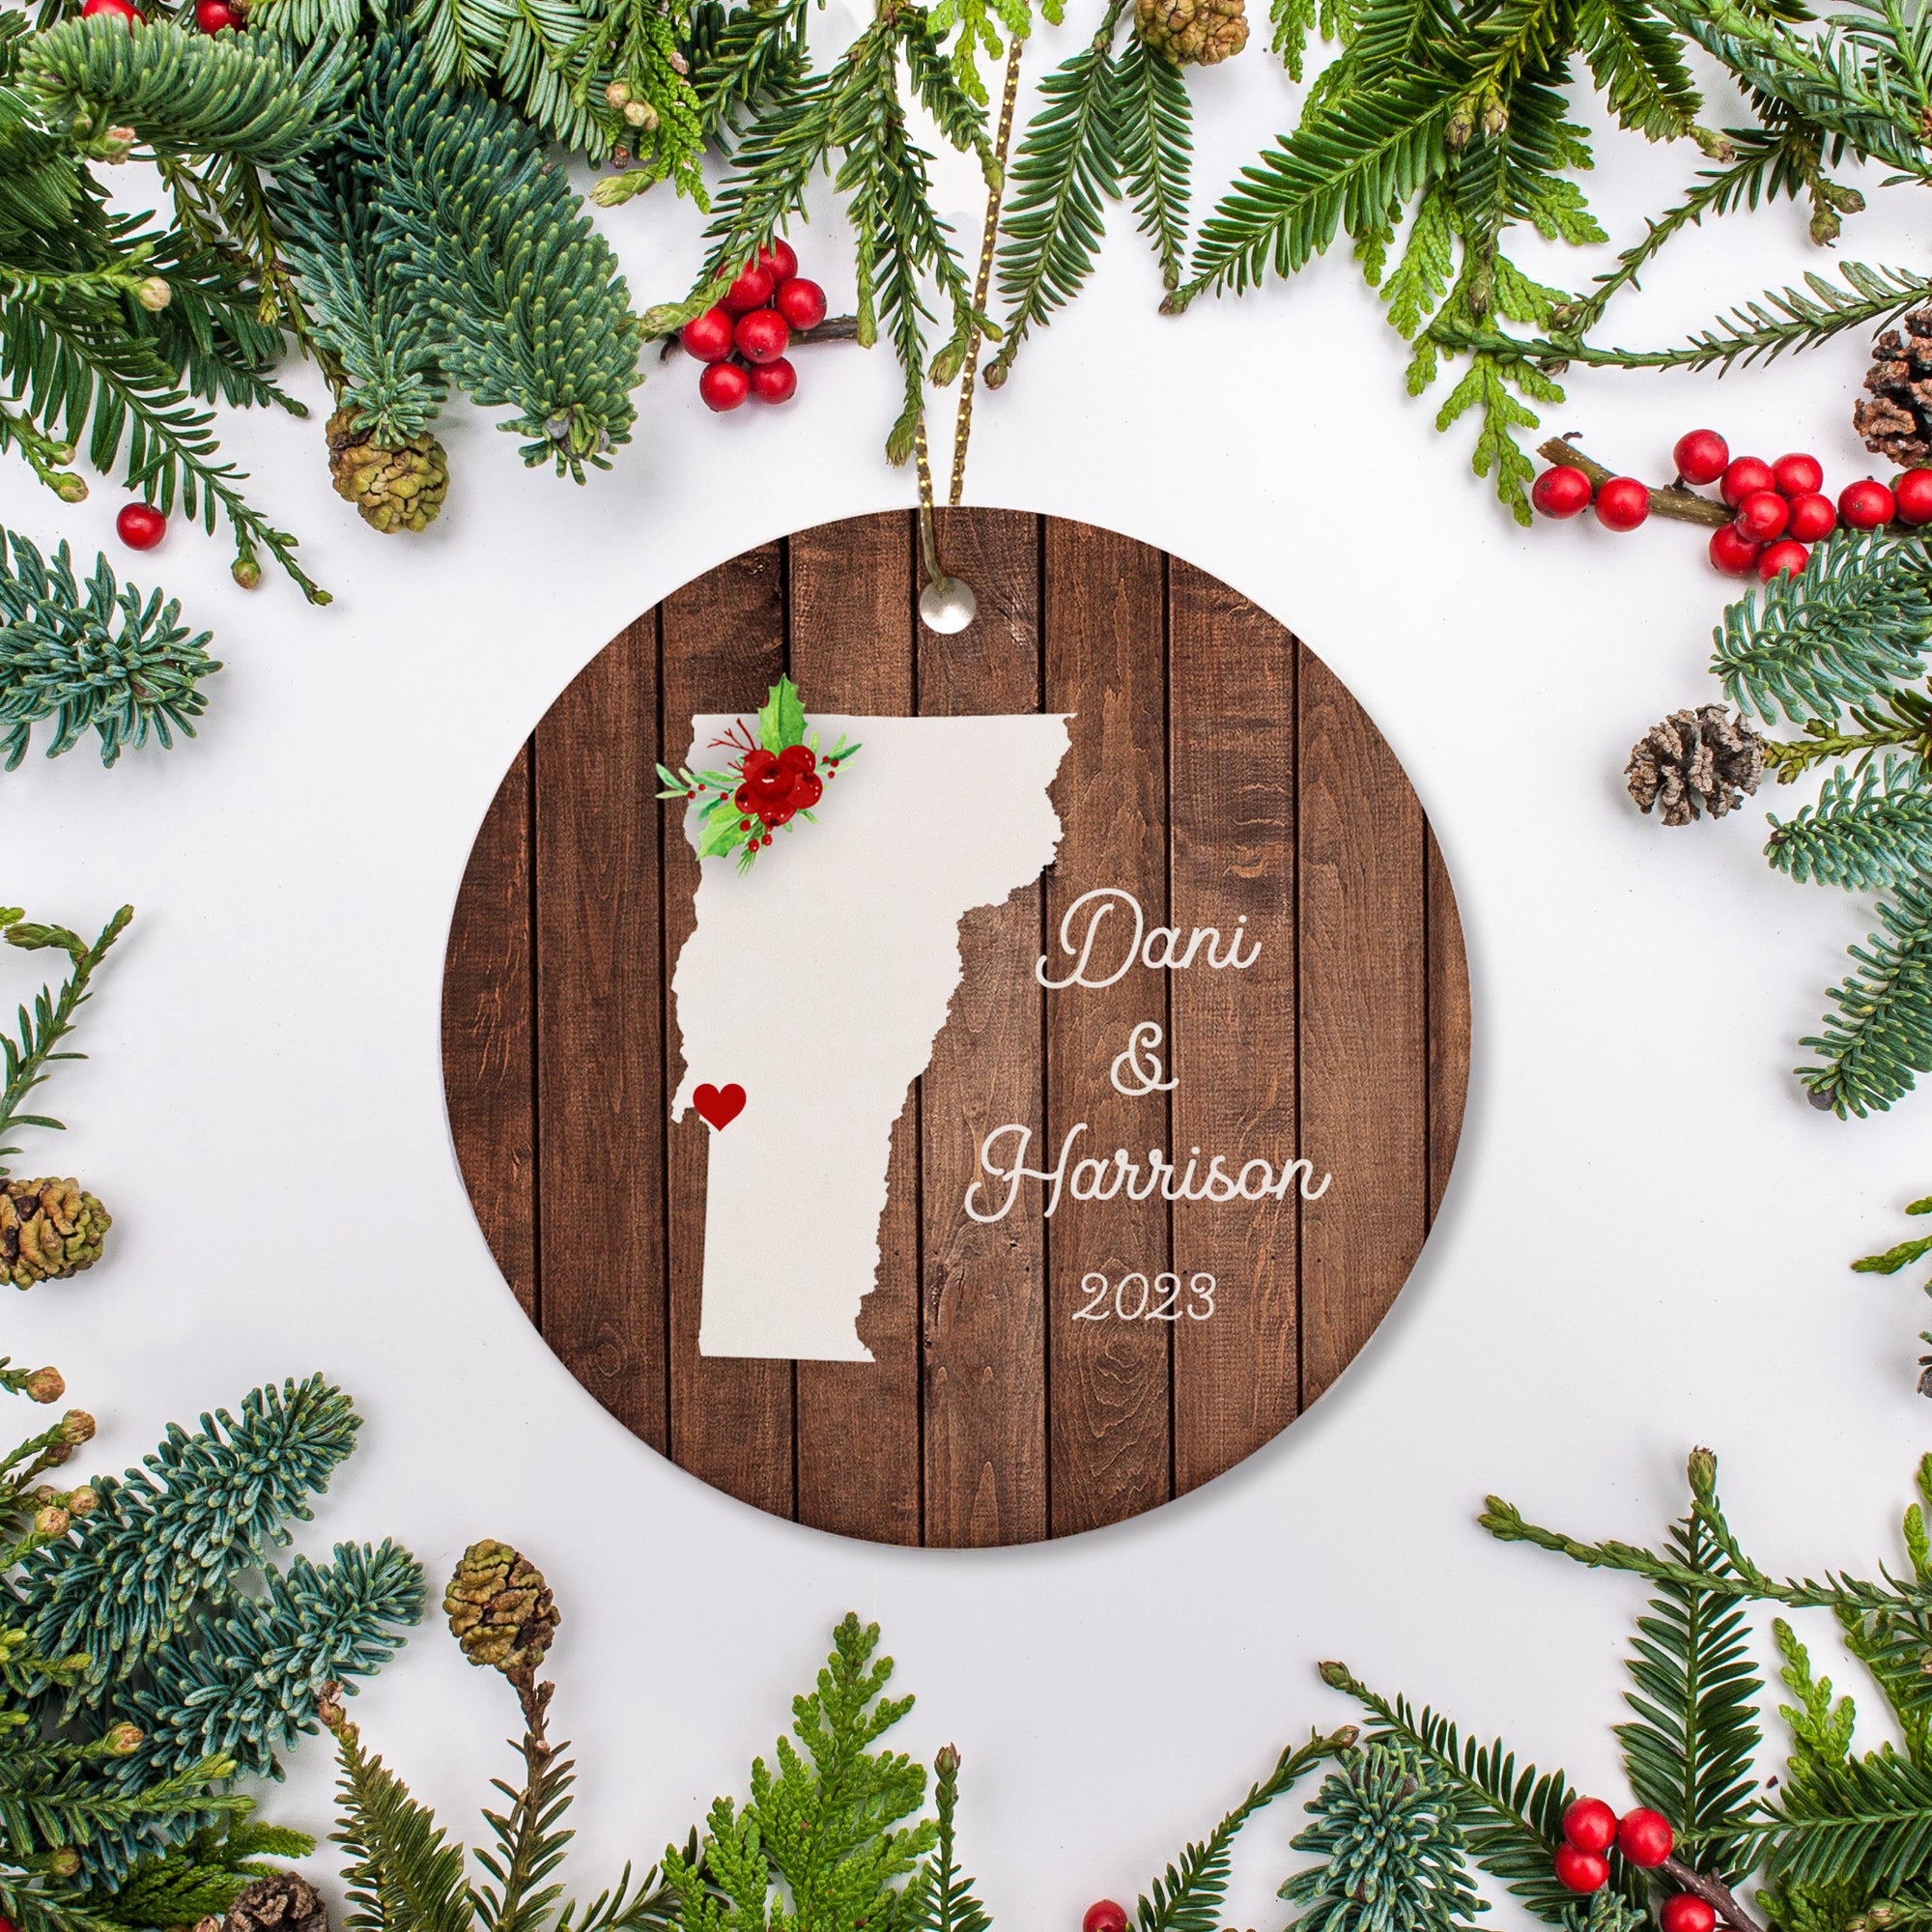 Vermont state christmas ornament. Personalized with your name, city, and year. Ceramic keepsake ornament with a gold hanging string. Great for a college student, new home owners, just moved, or vacation memory